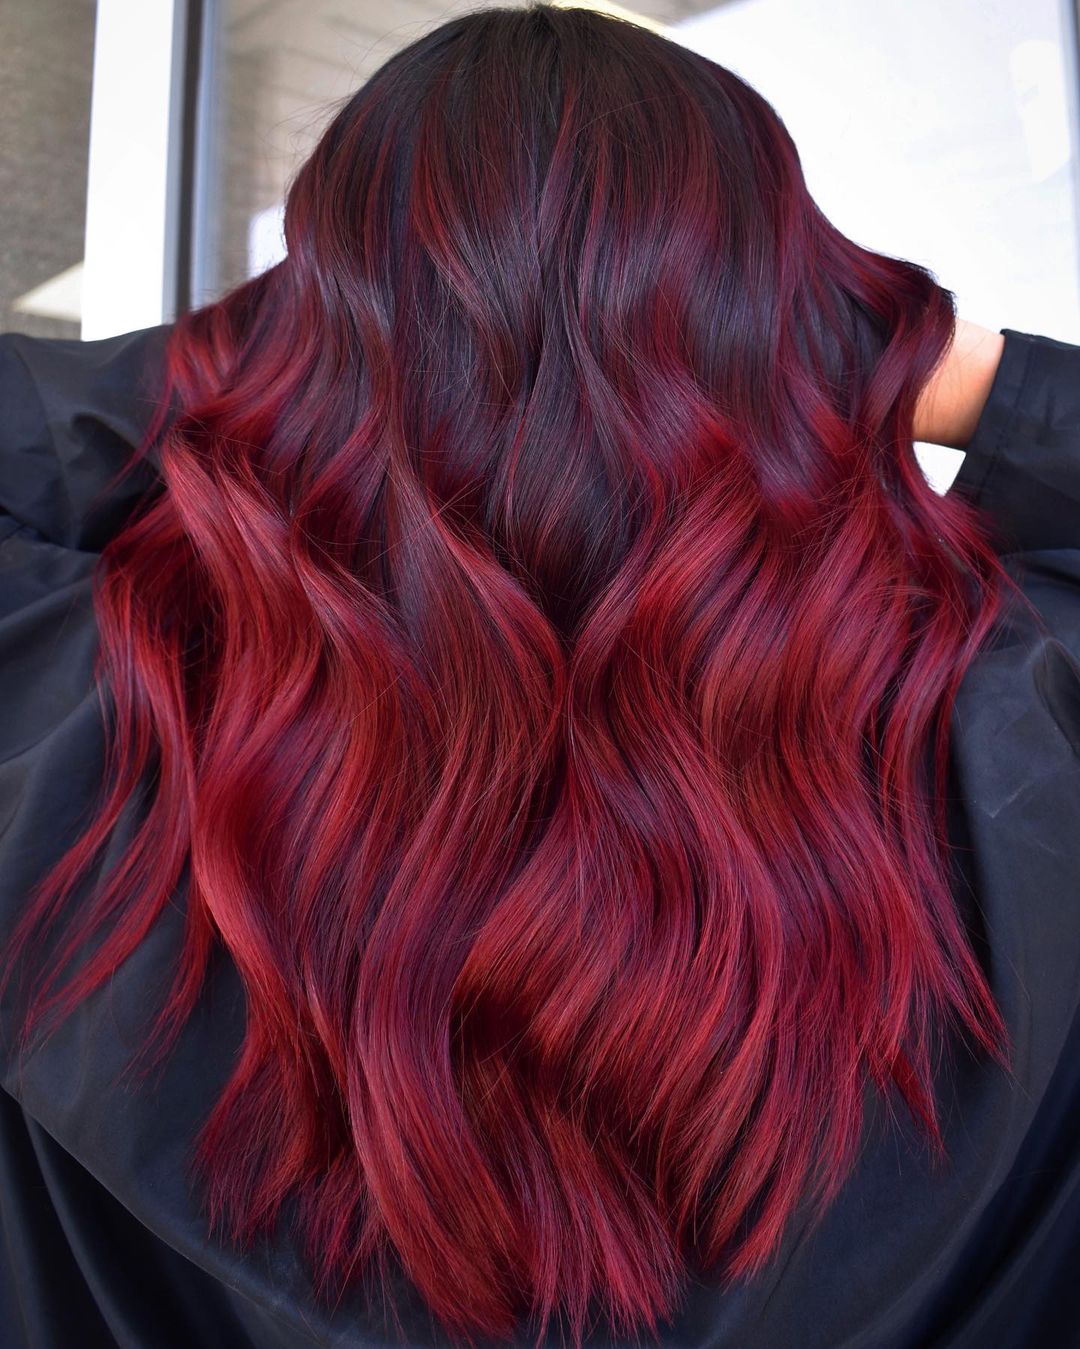 Natural Bright Red Hair Offers Shop, 53% OFF 